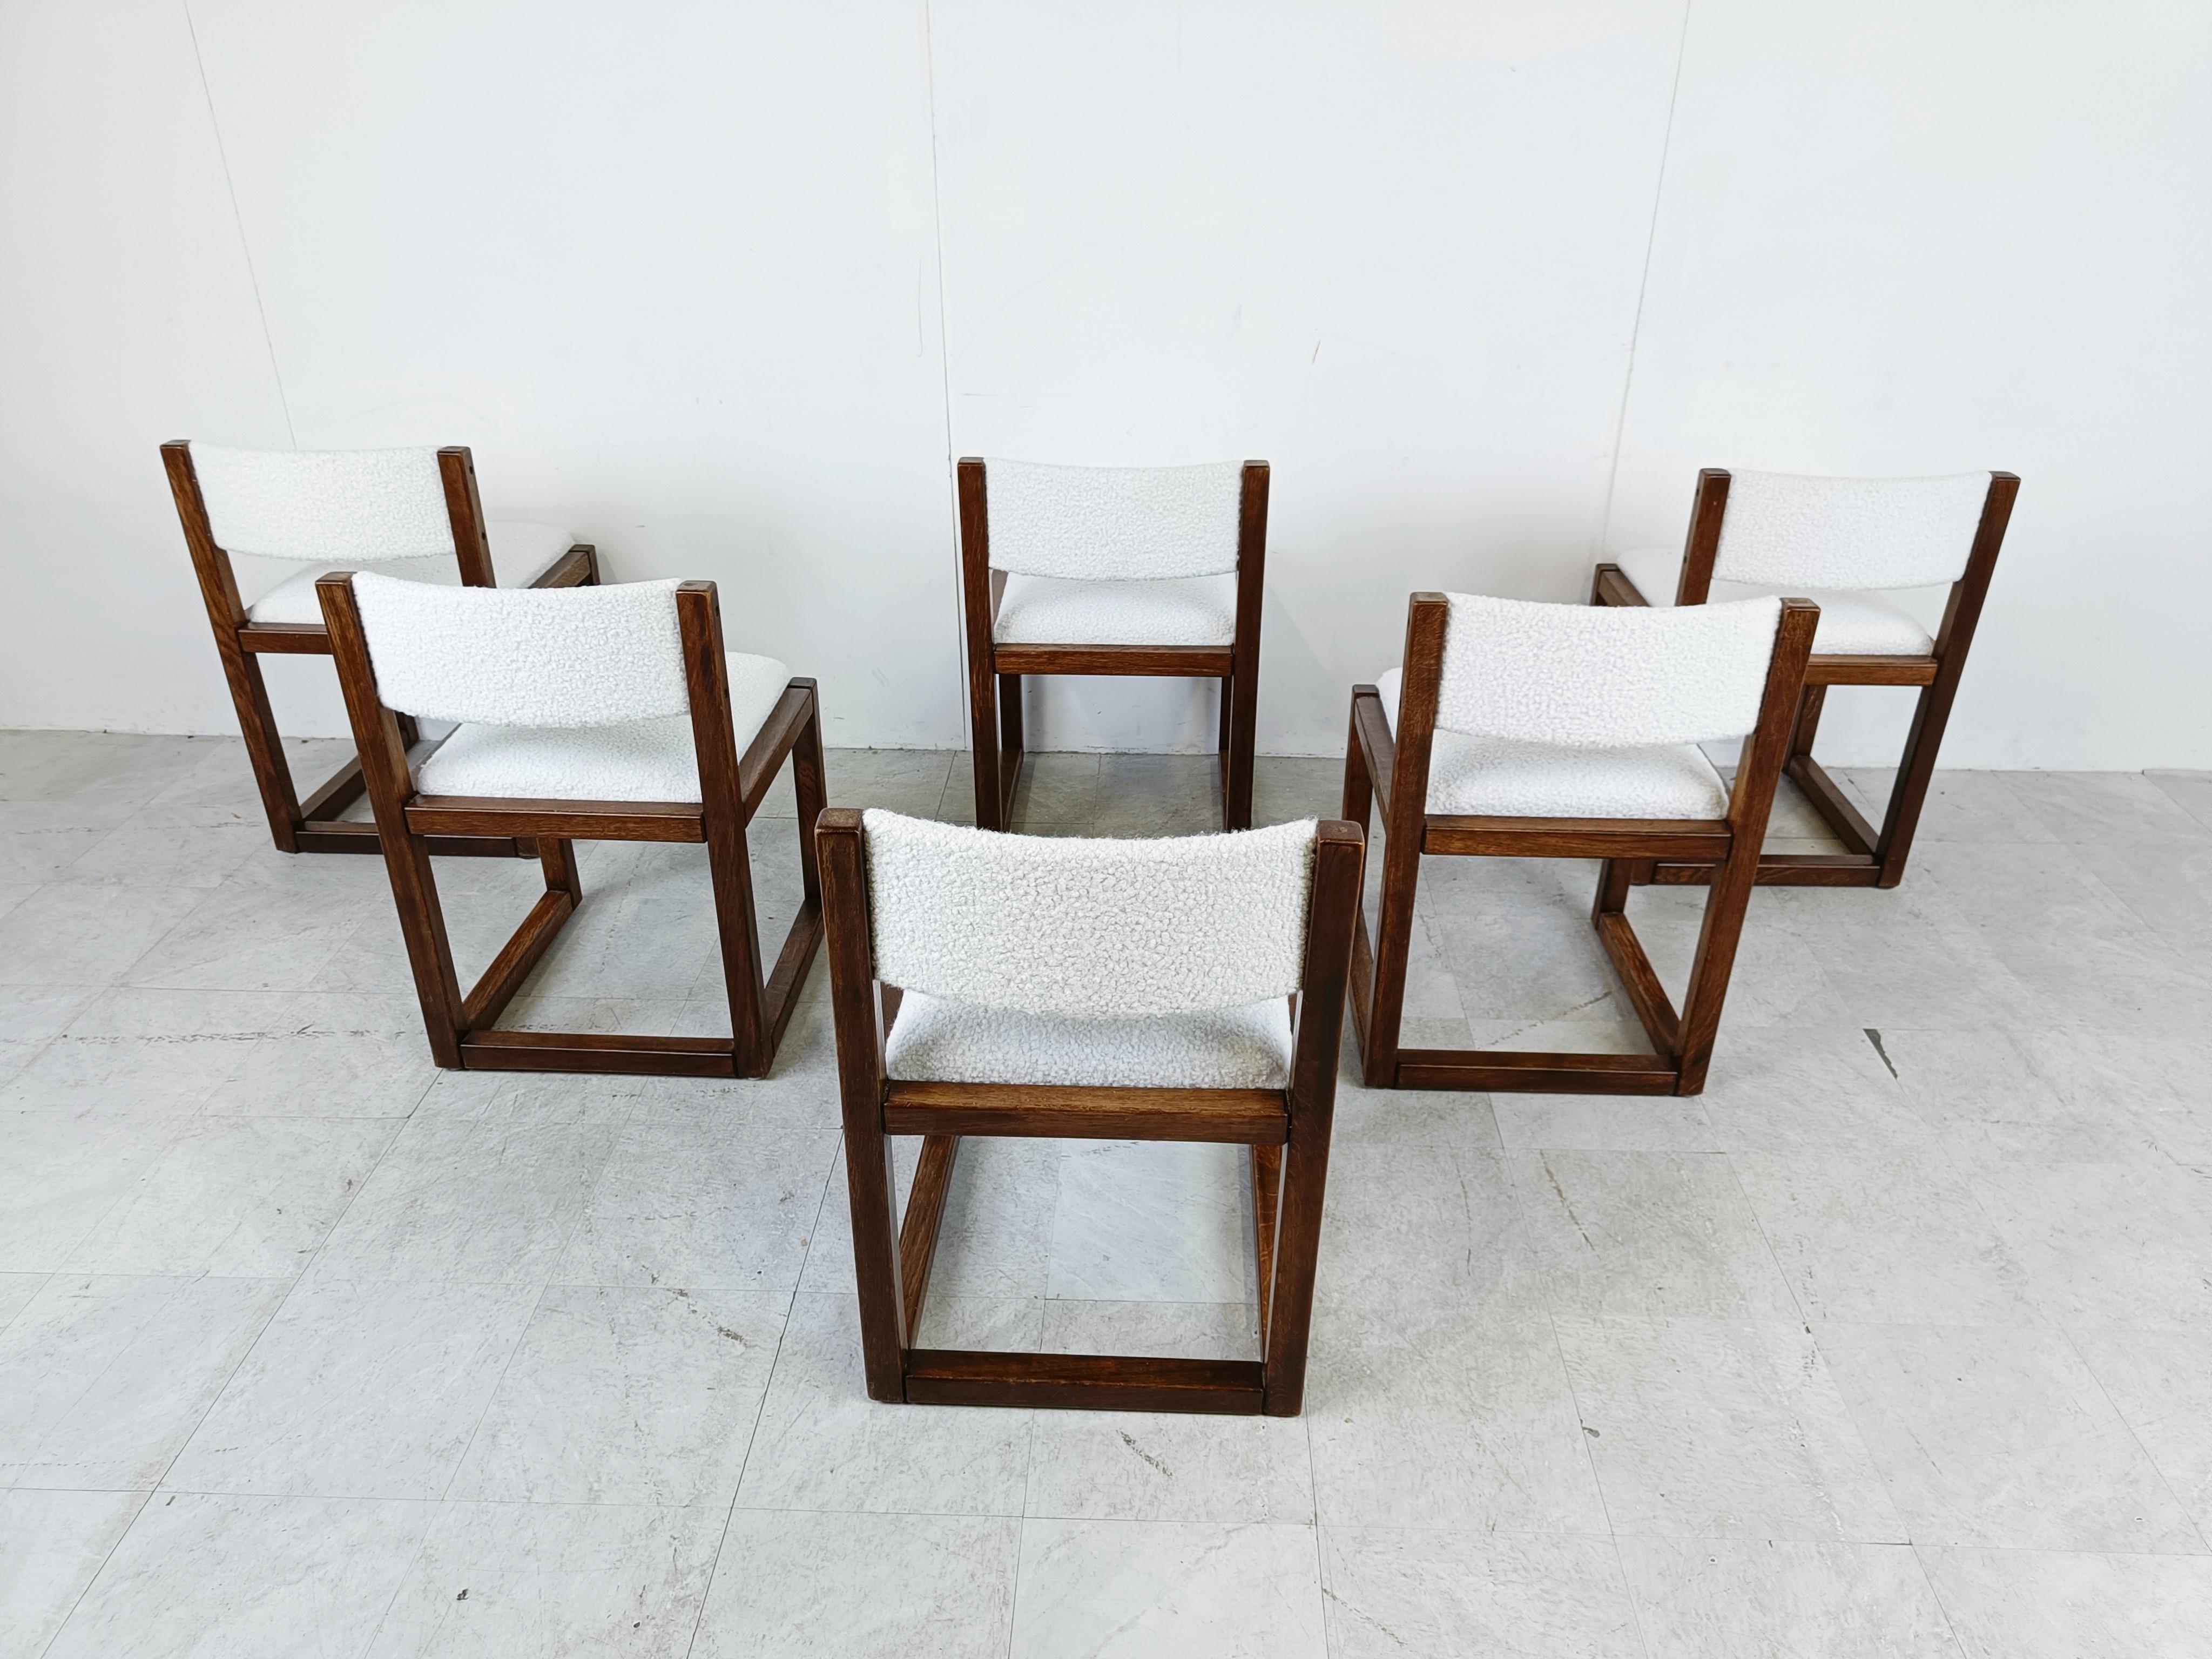 Vintage Brutalist Dining Chairs, Set of 6 - 1960s 1